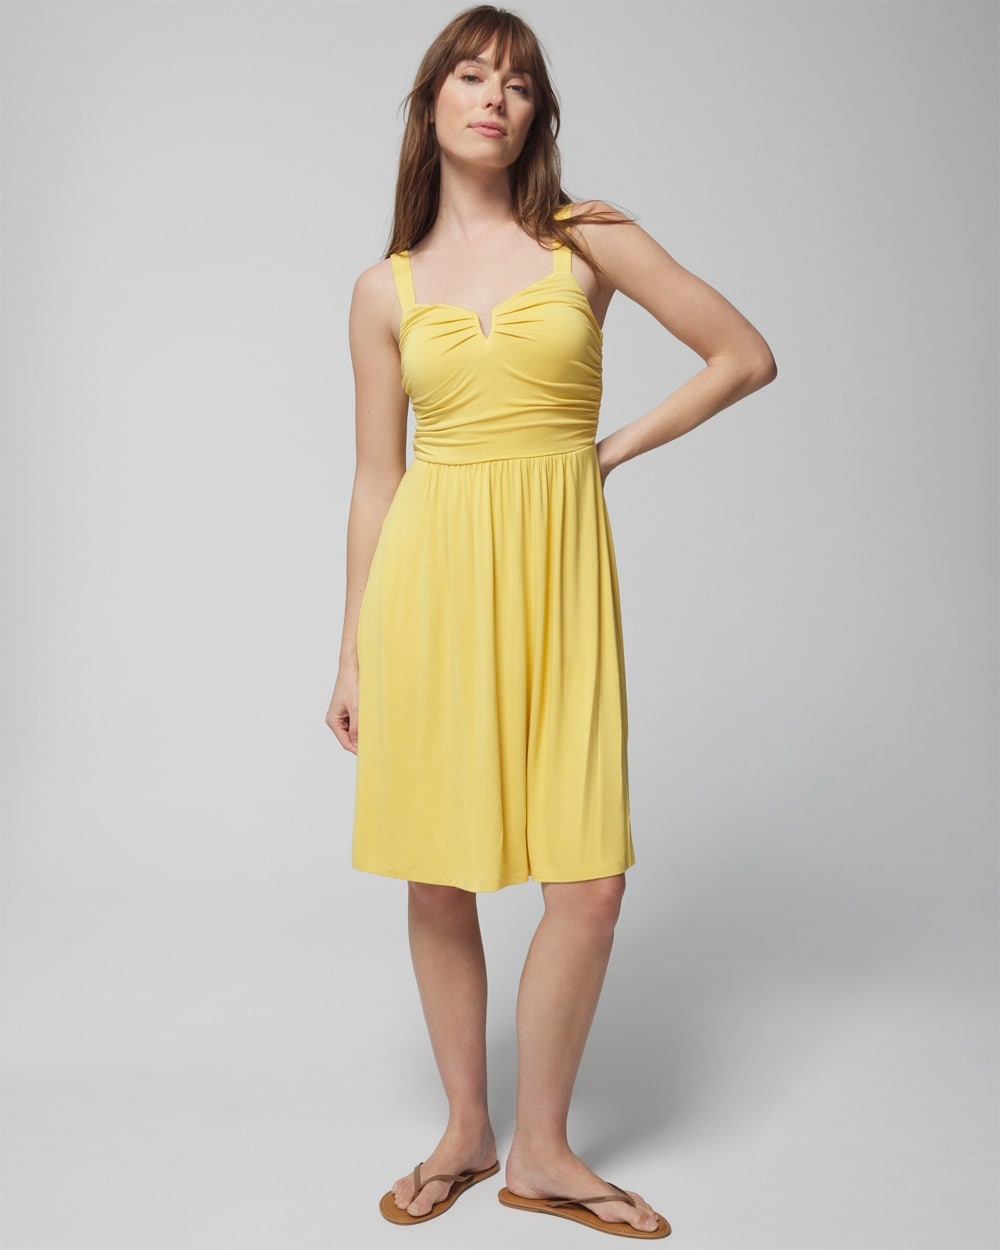 Shop Soma Women's Soft Jersey V-wire Short Sundress With Built-in Bra In Yellow Size Medium |  In Limelight